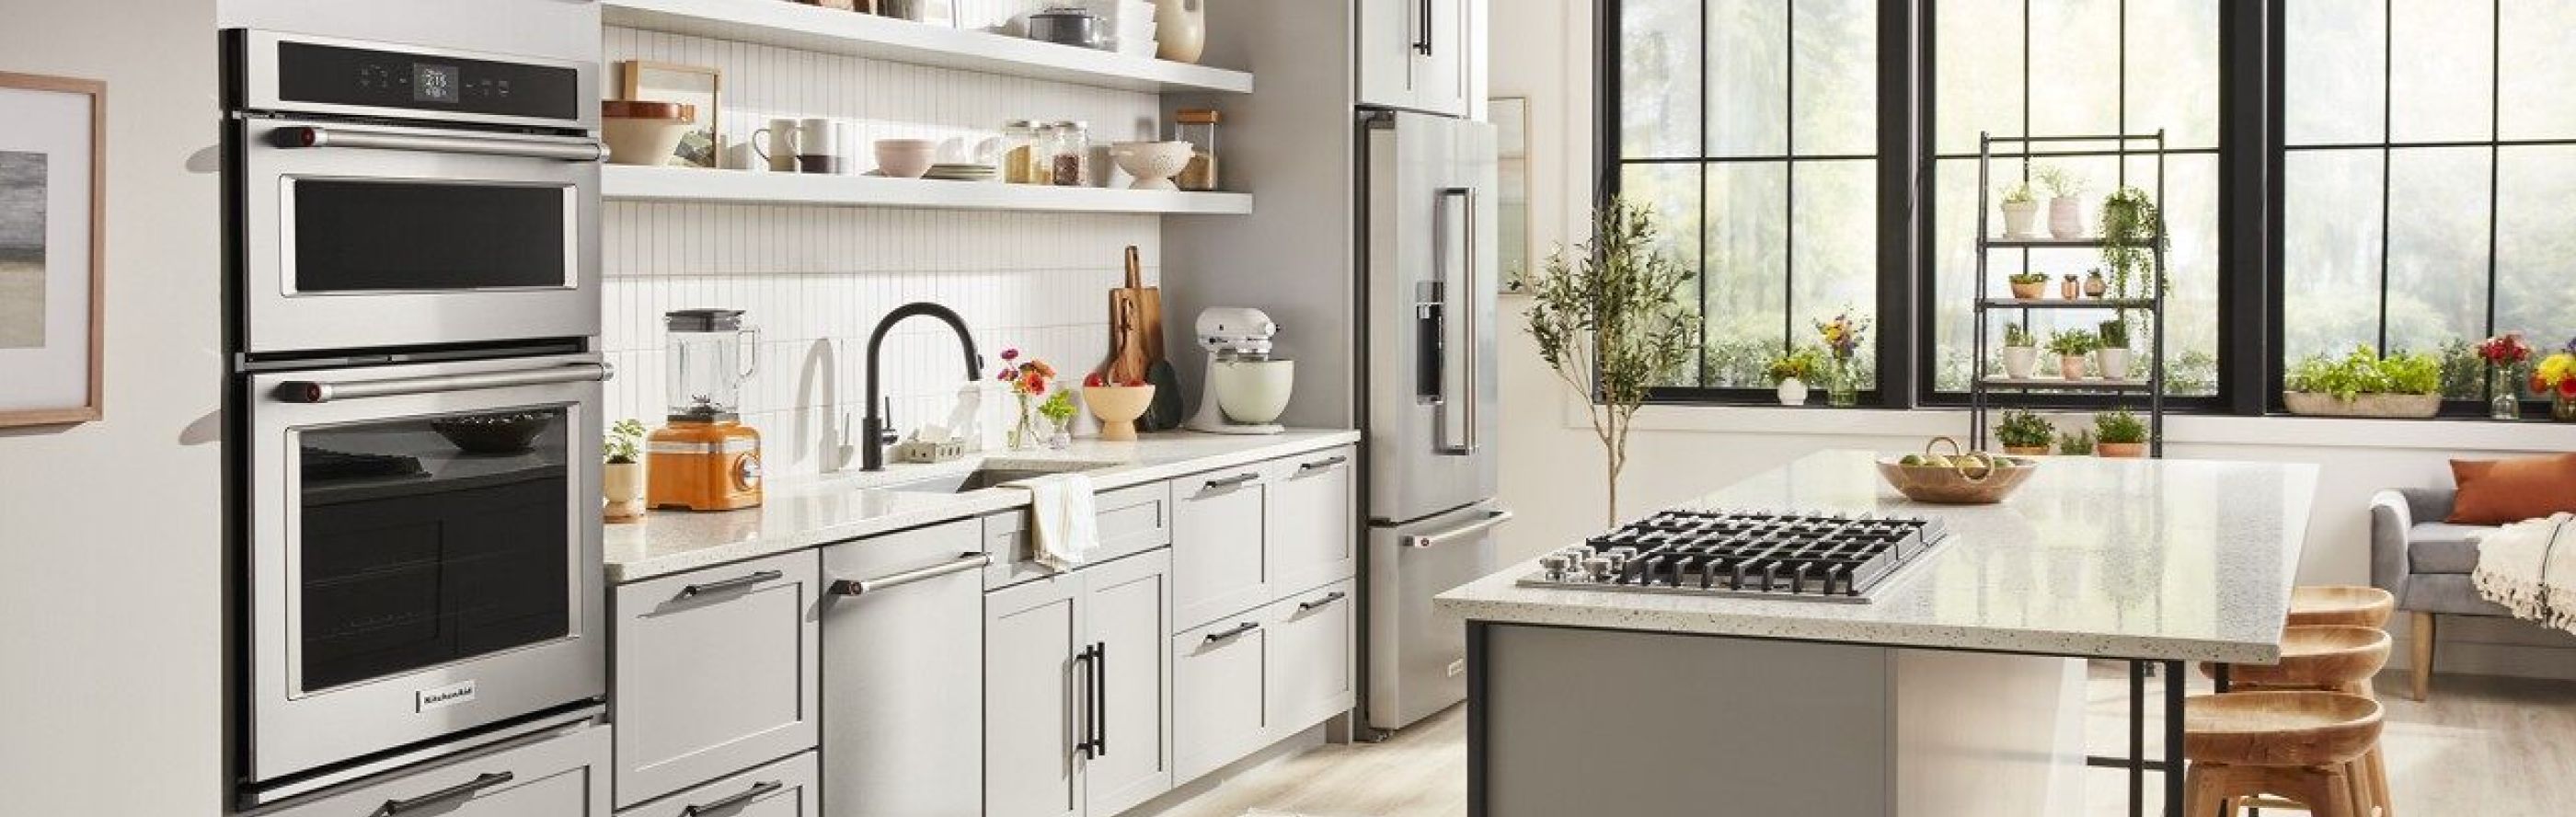 KitchenAid® appliances in a black and white themed kitchen.